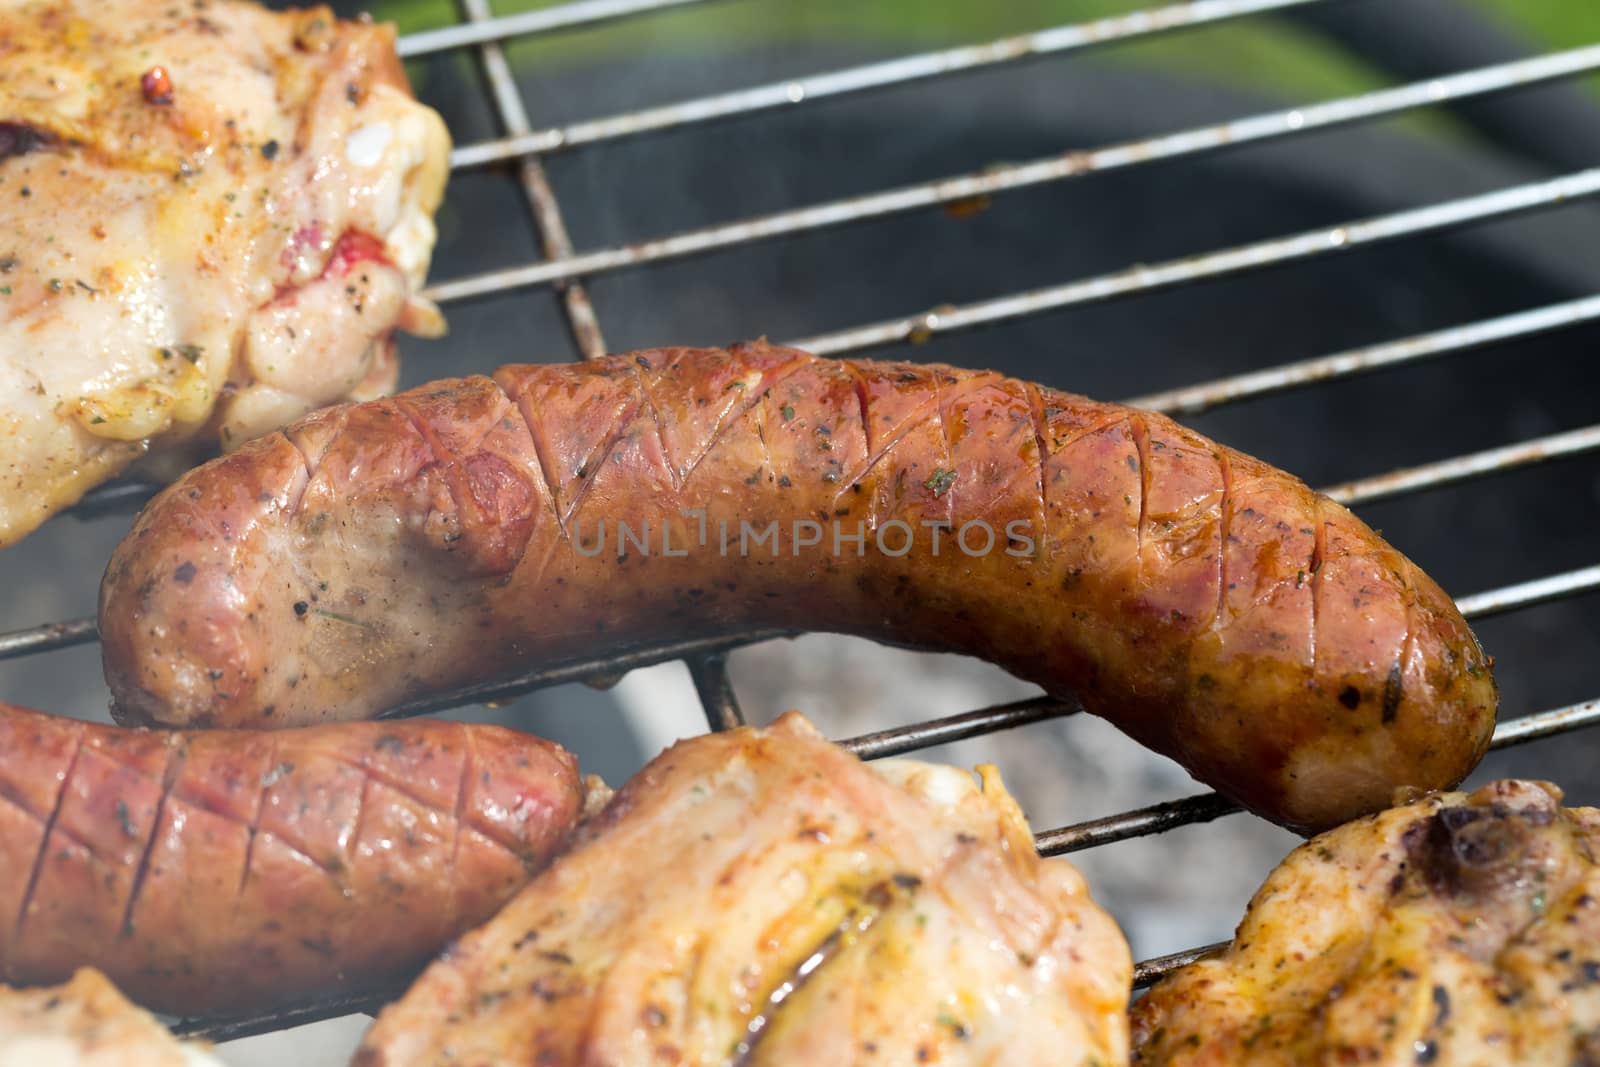 barbecue with delicious grilled meat on grill 